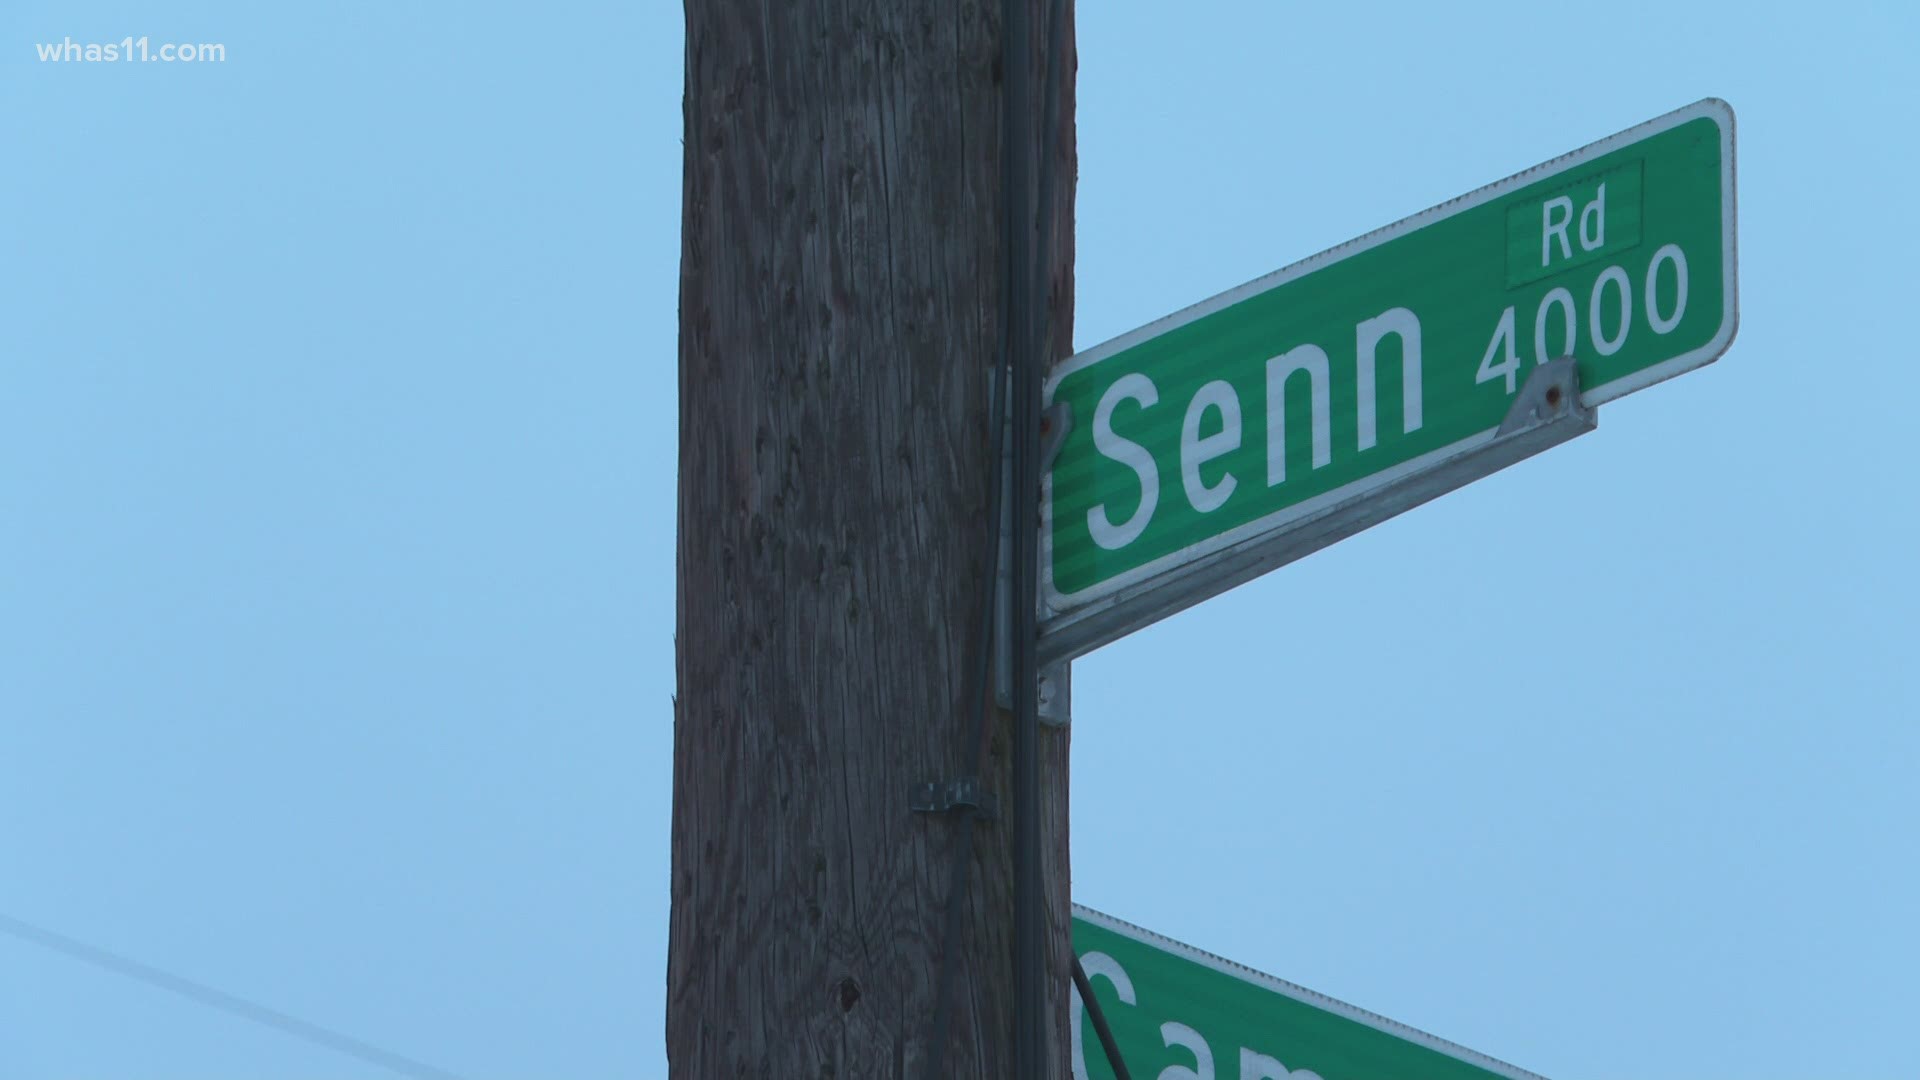 A 17-year-old has been arrested and charged with murder in a shooting that happened on Senn Rd. last year.